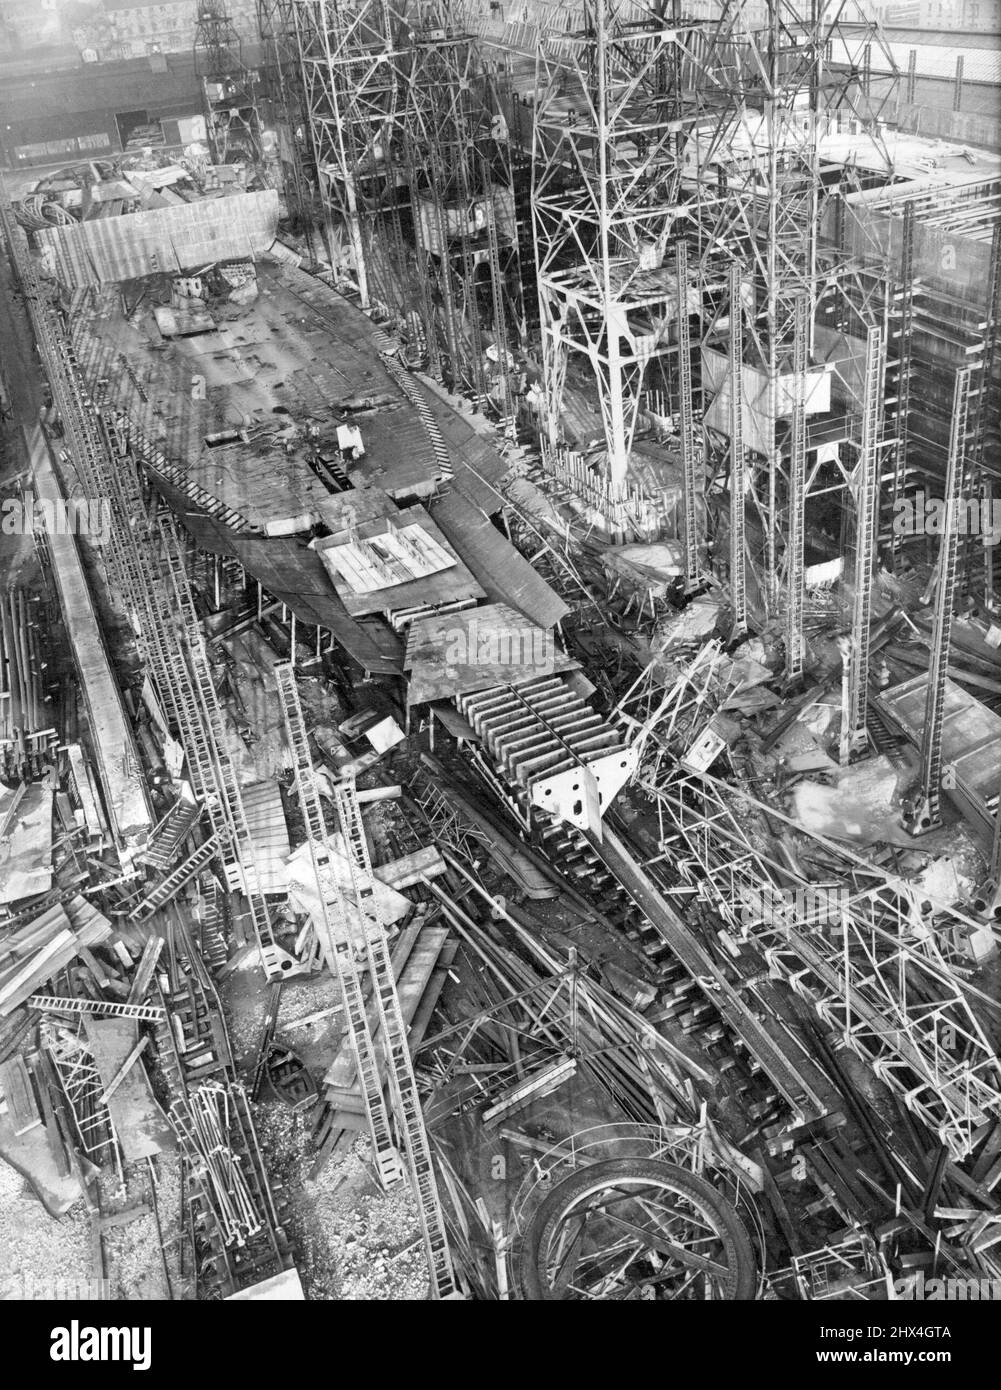 First New Big liner to be built by the P. and O. Company for the Australian trade, the Himalaya (29,000 tons) is the largest vessel ever designed for the Company and will carry 1200 passengers. She is shown here building at Vickers-Armstrong works Barrow-in-Furness. January 07, 1947. Stock Photo